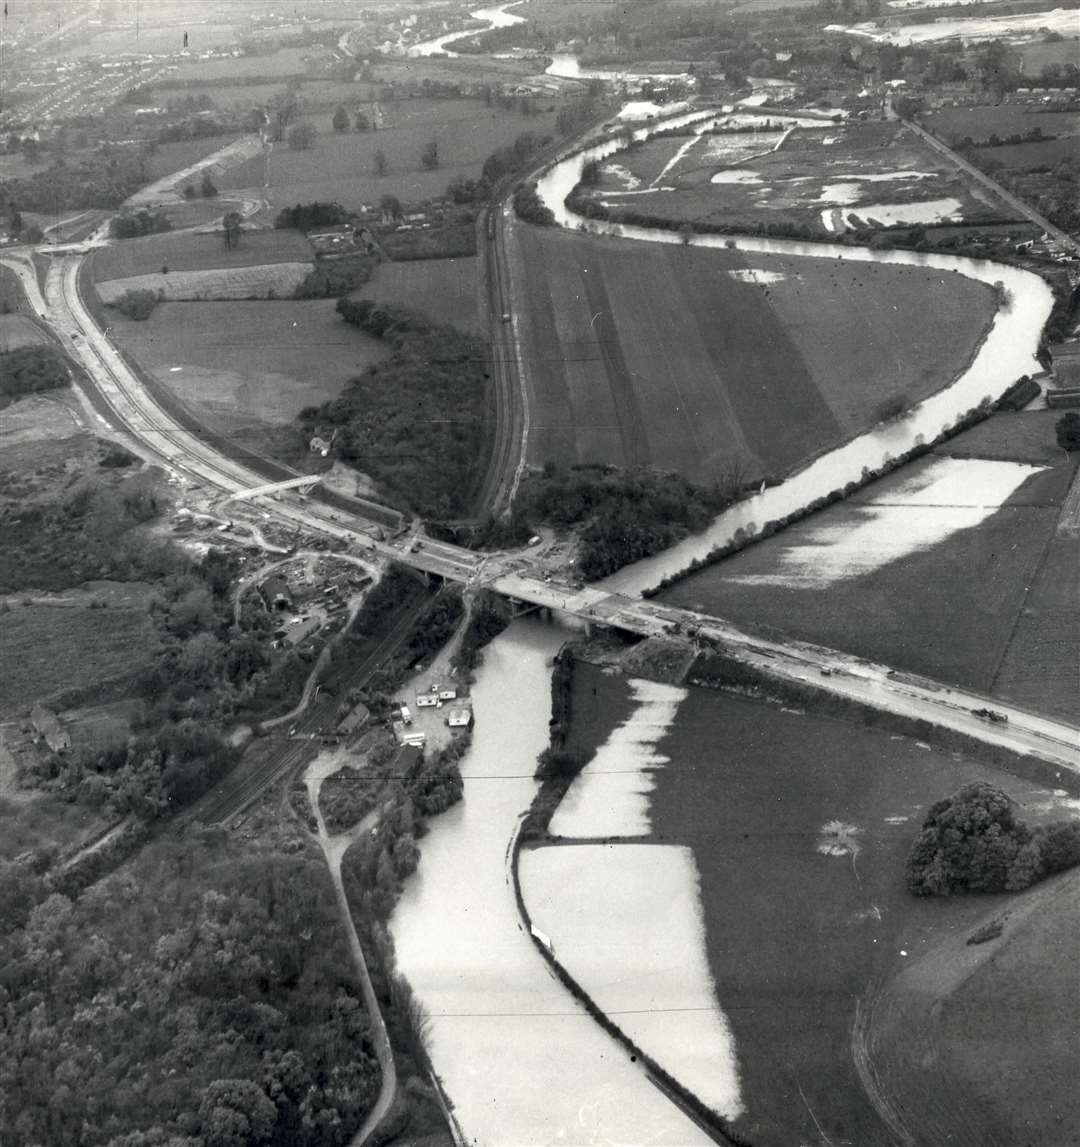 The new bridge across the River Medway on the western section of the Maidstone bypass opened in December 1960